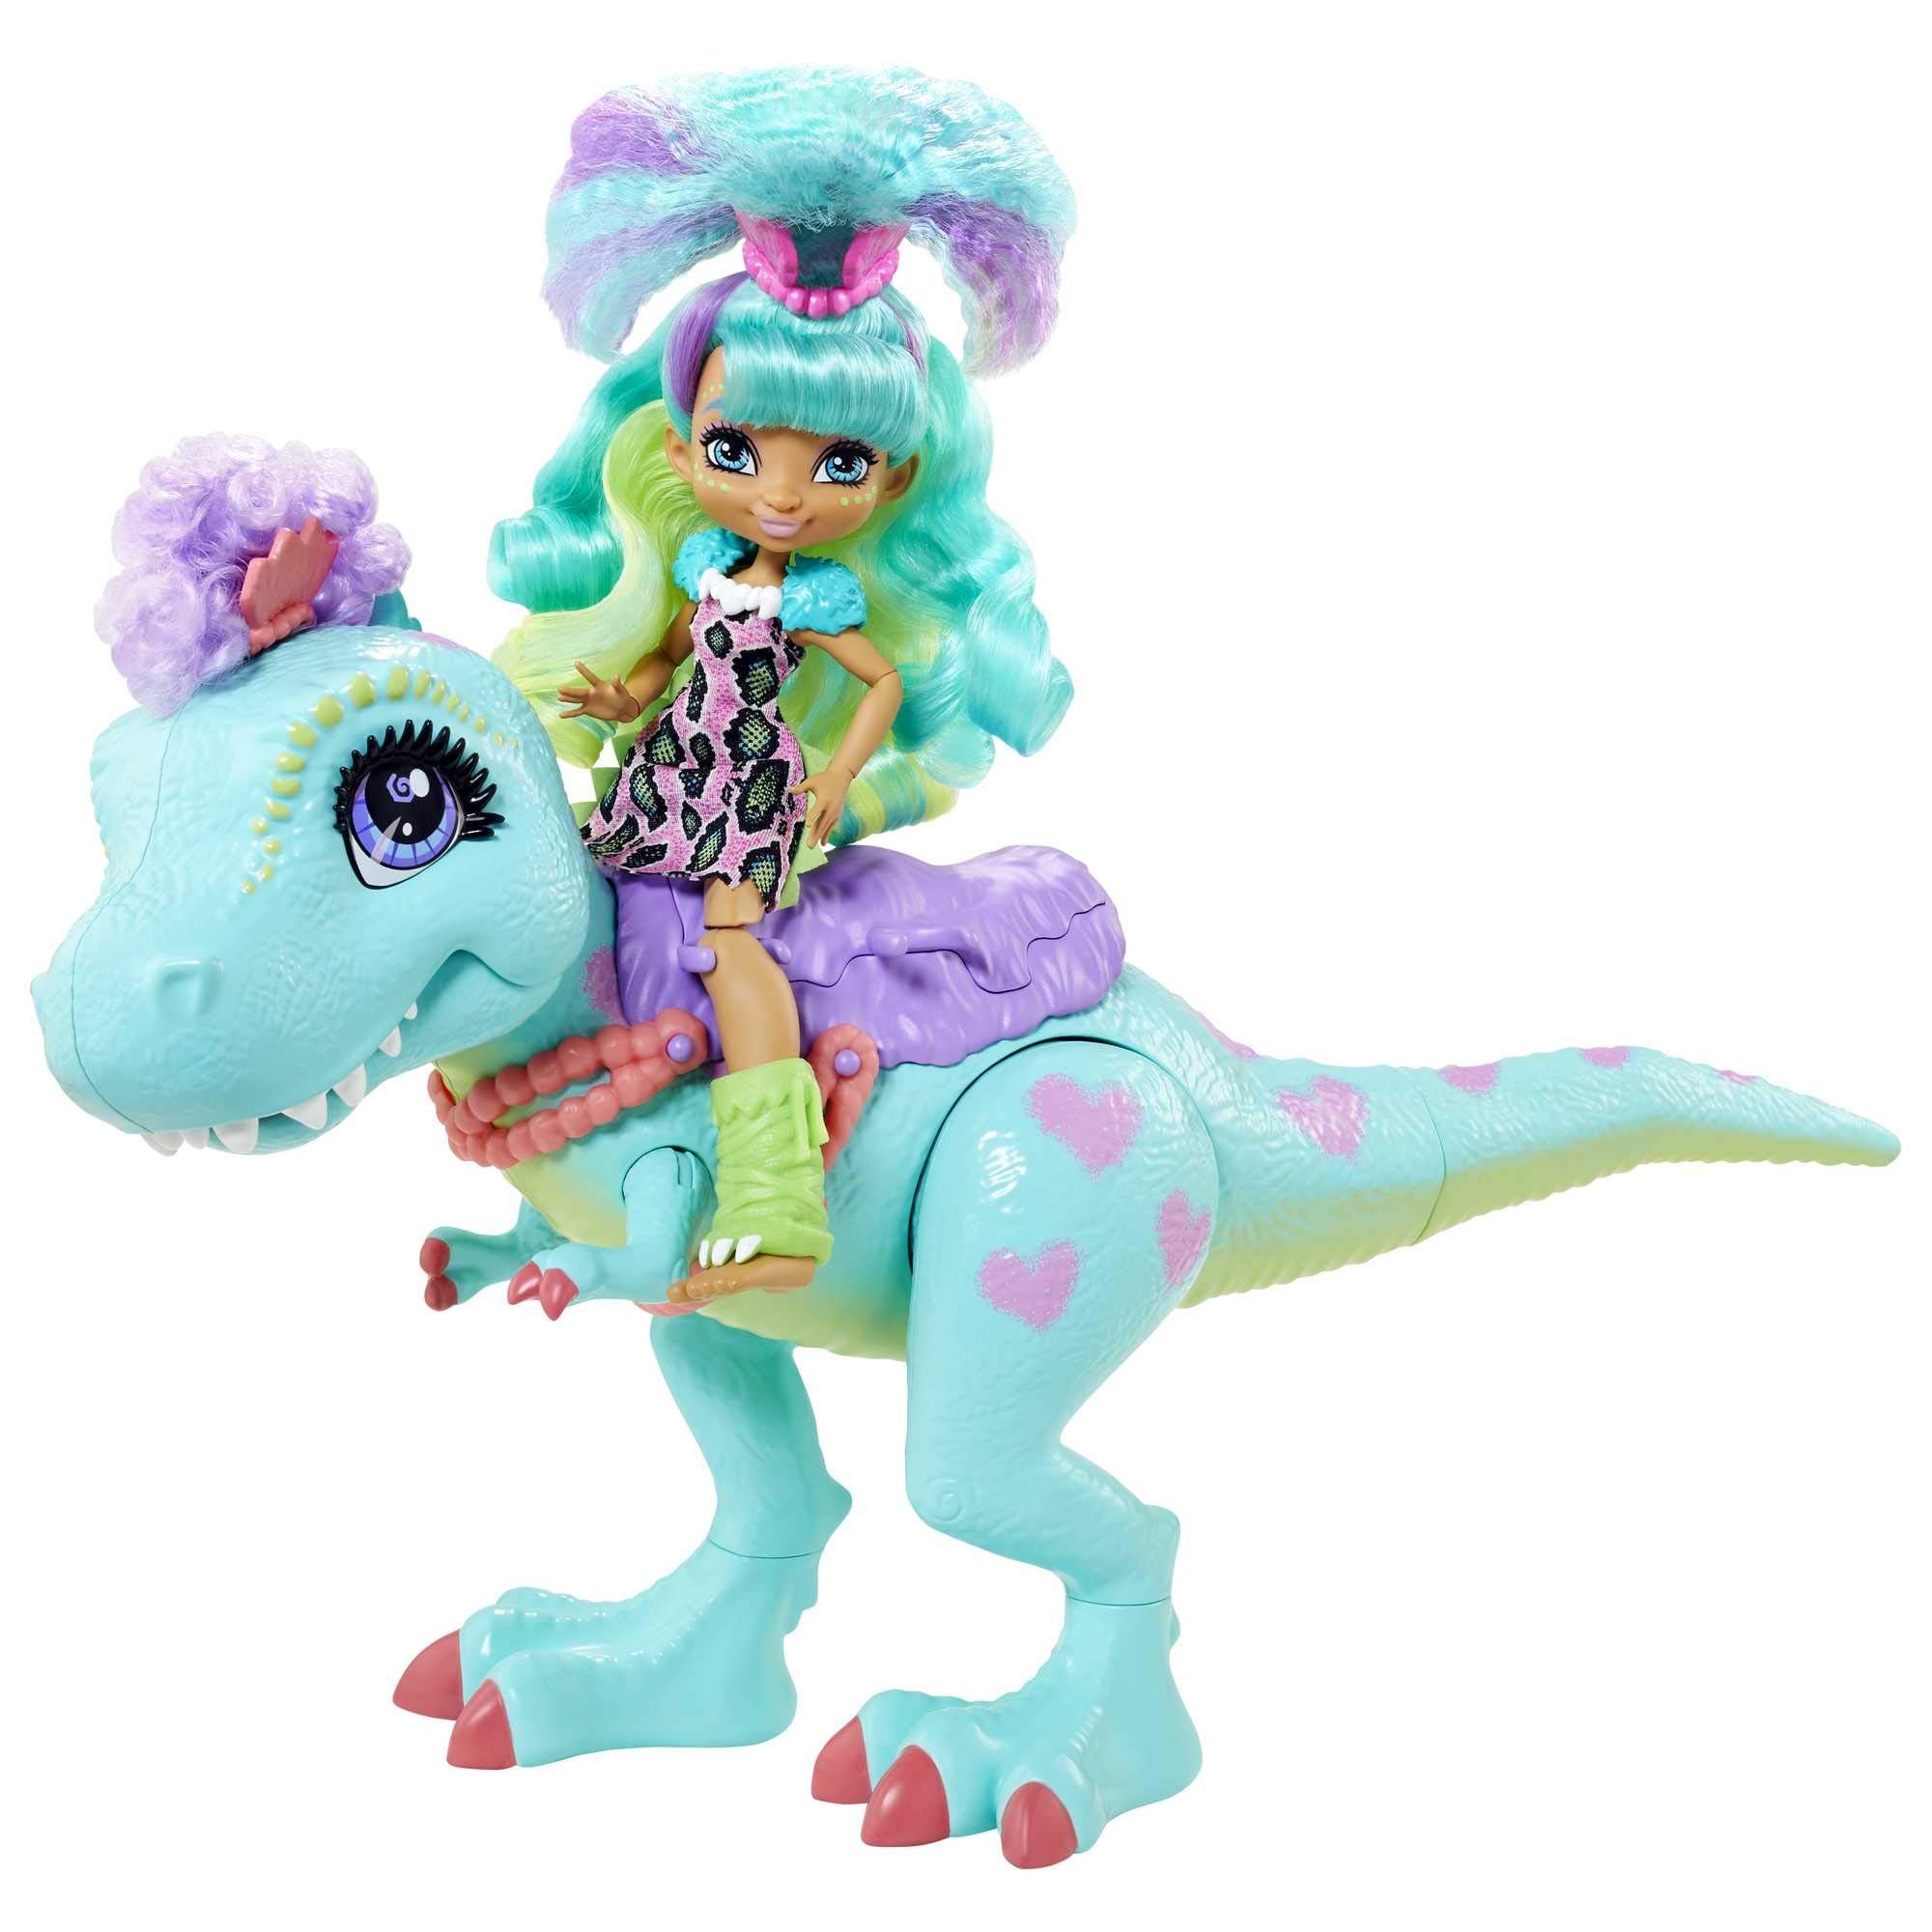 Cave Club Rockelle Doll and Tyrasaurus Dinosaur Pal Playset with Accessories, Gift for 4 Year Olds and up